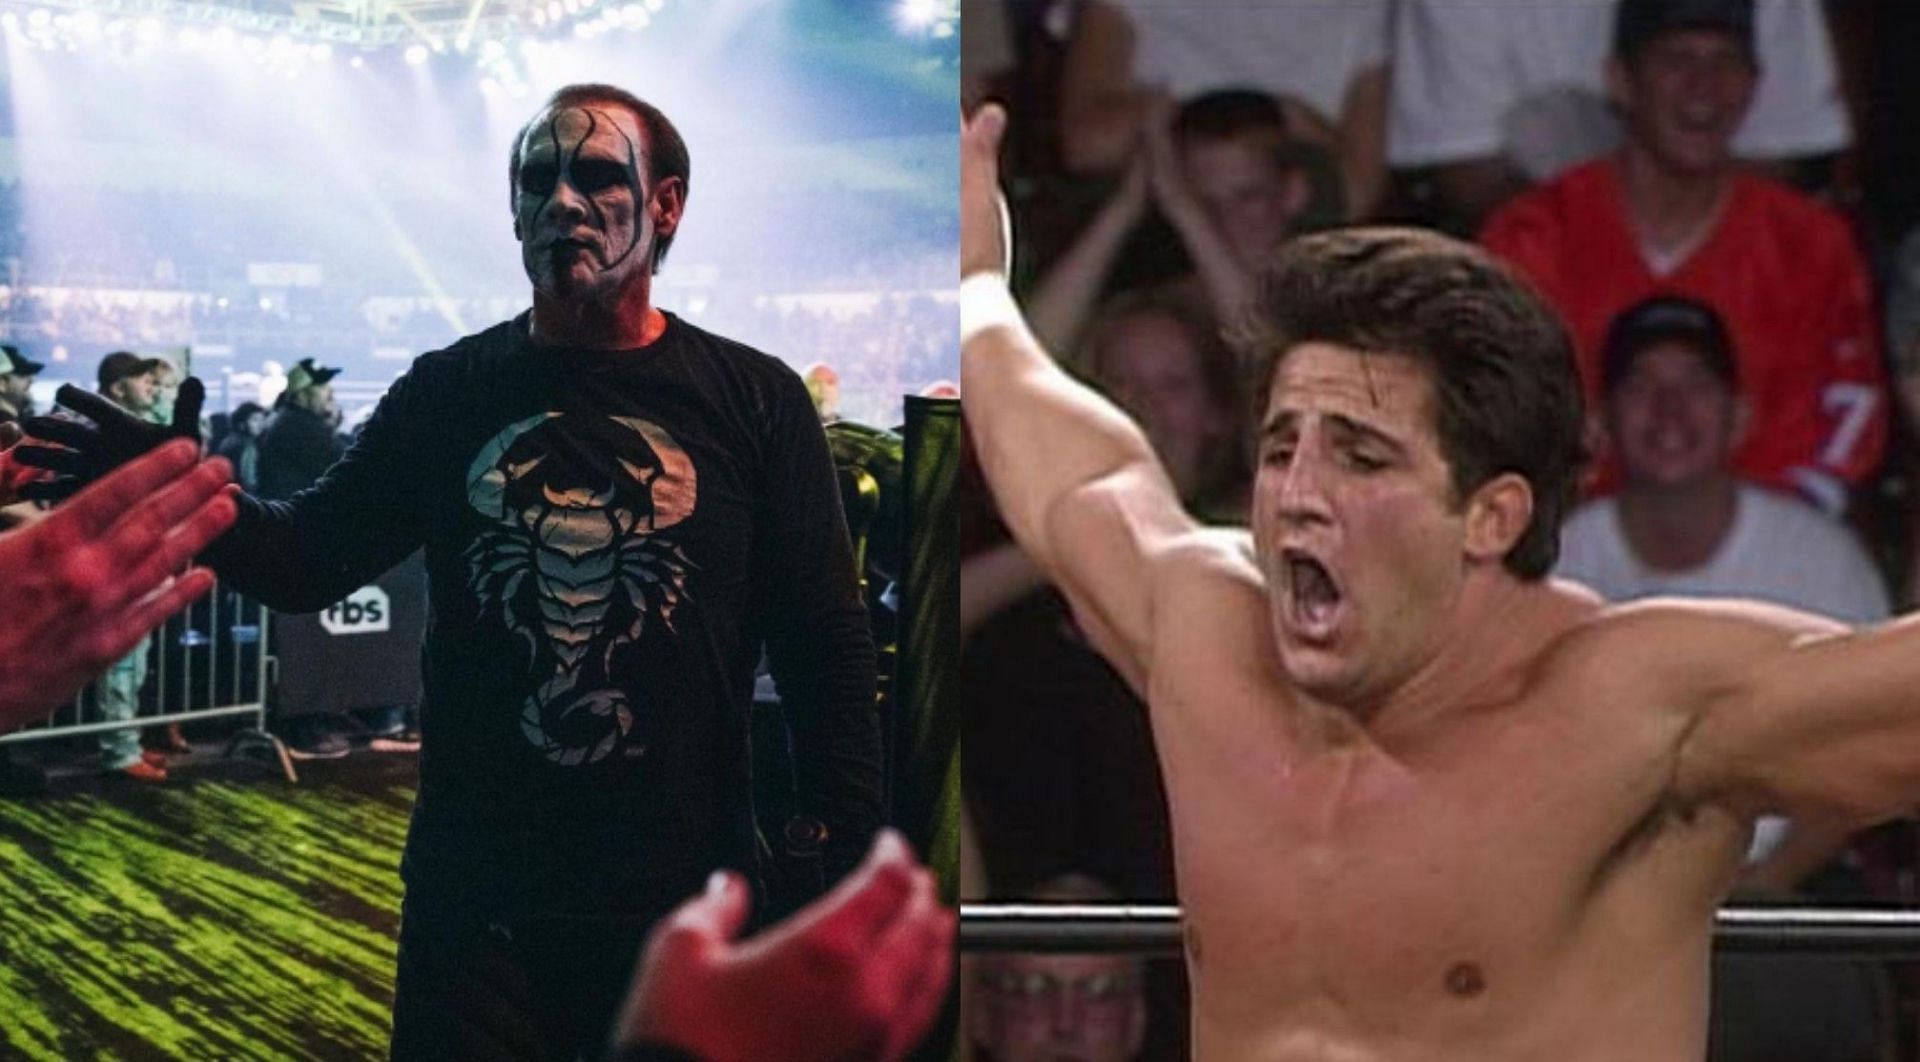 Sting (left) and Disco Inferno (right) are both WCW legends